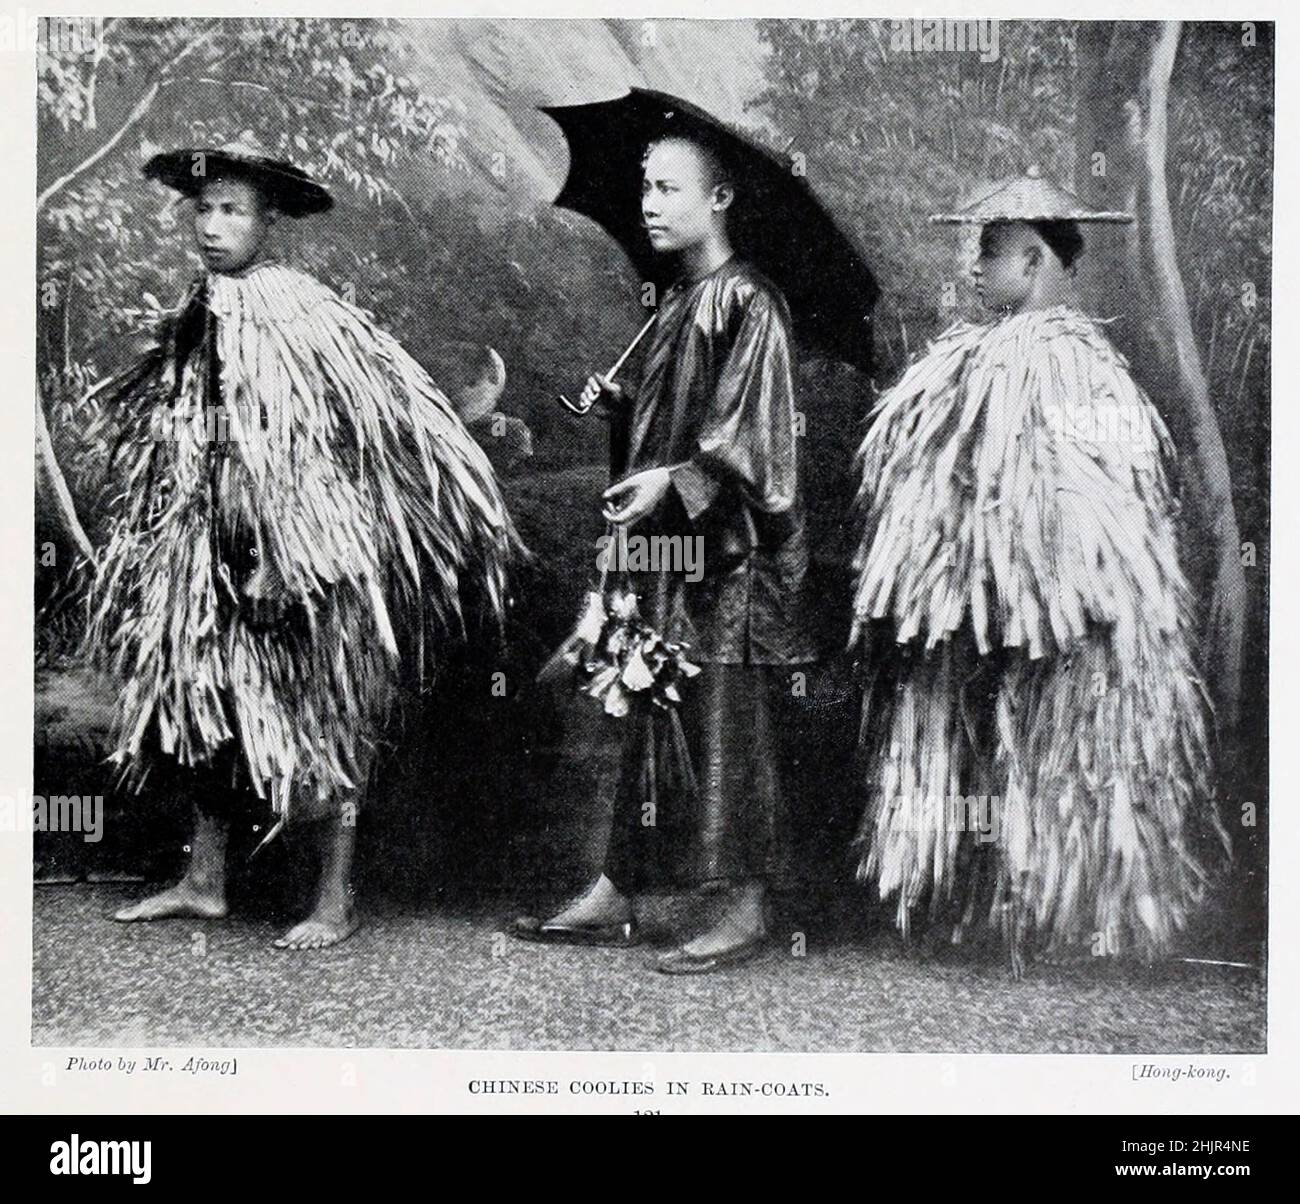 Chinese coolies [(ethnic slur) an offensive name for an unskilled Asian labourer] in rain-coats from the book '  The living races of mankind ' Vol 1 by Henry Neville Hutchinson,, editors John Walter Gregory, and Richard Lydekker, Publisher: London,  Hutchinson & co 1901 Stock Photo